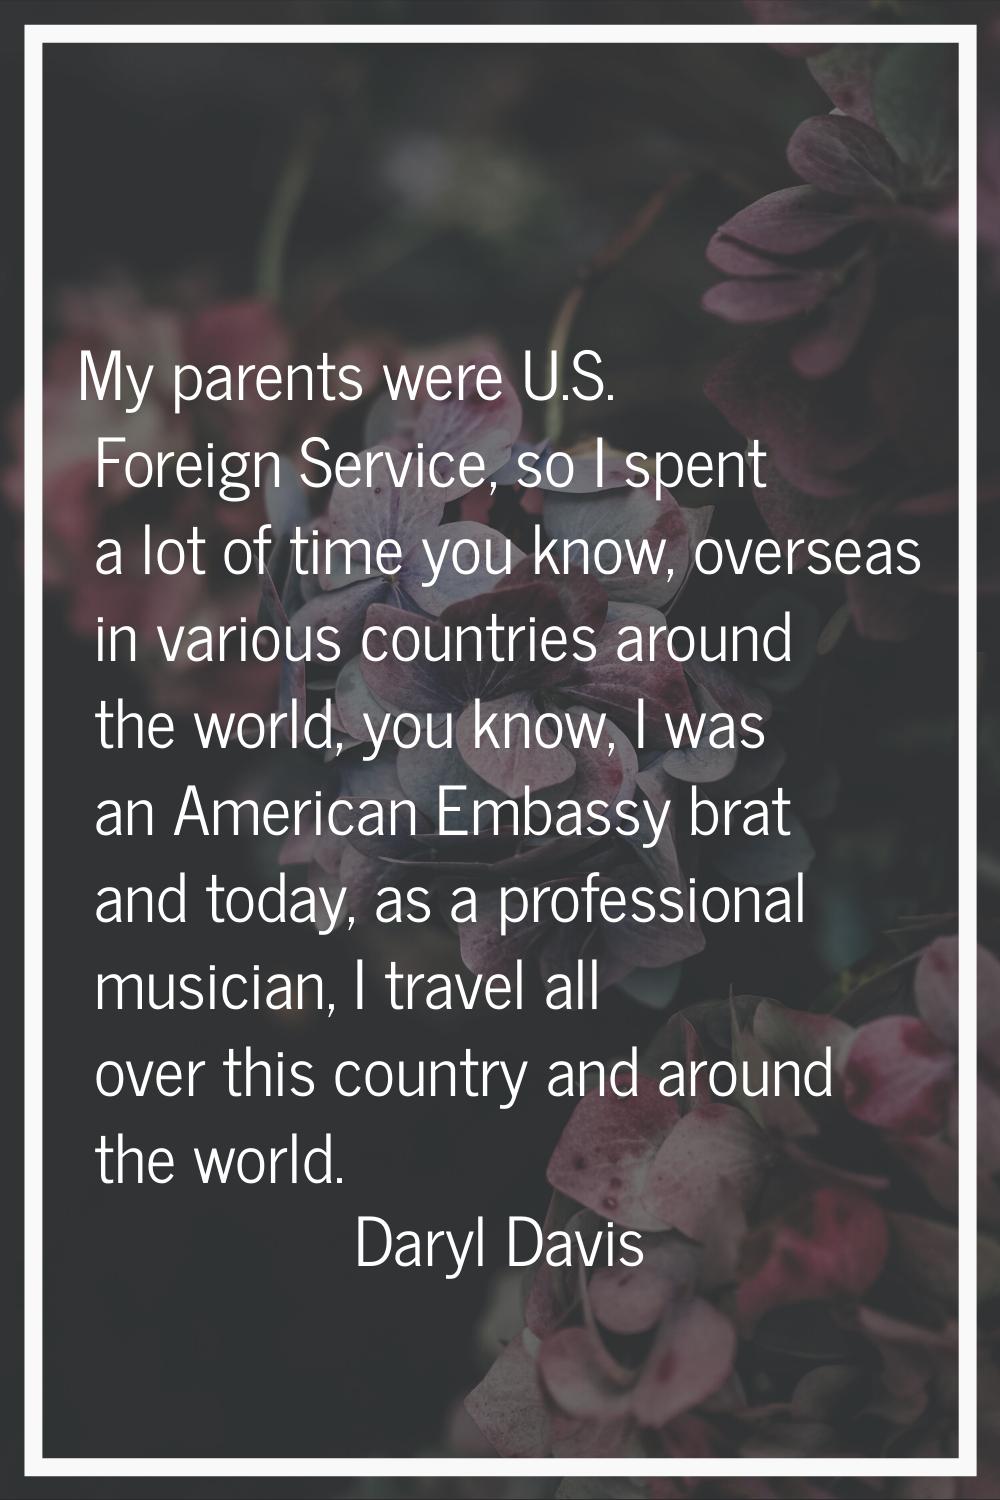 My parents were U.S. Foreign Service, so I spent a lot of time you know, overseas in various countr